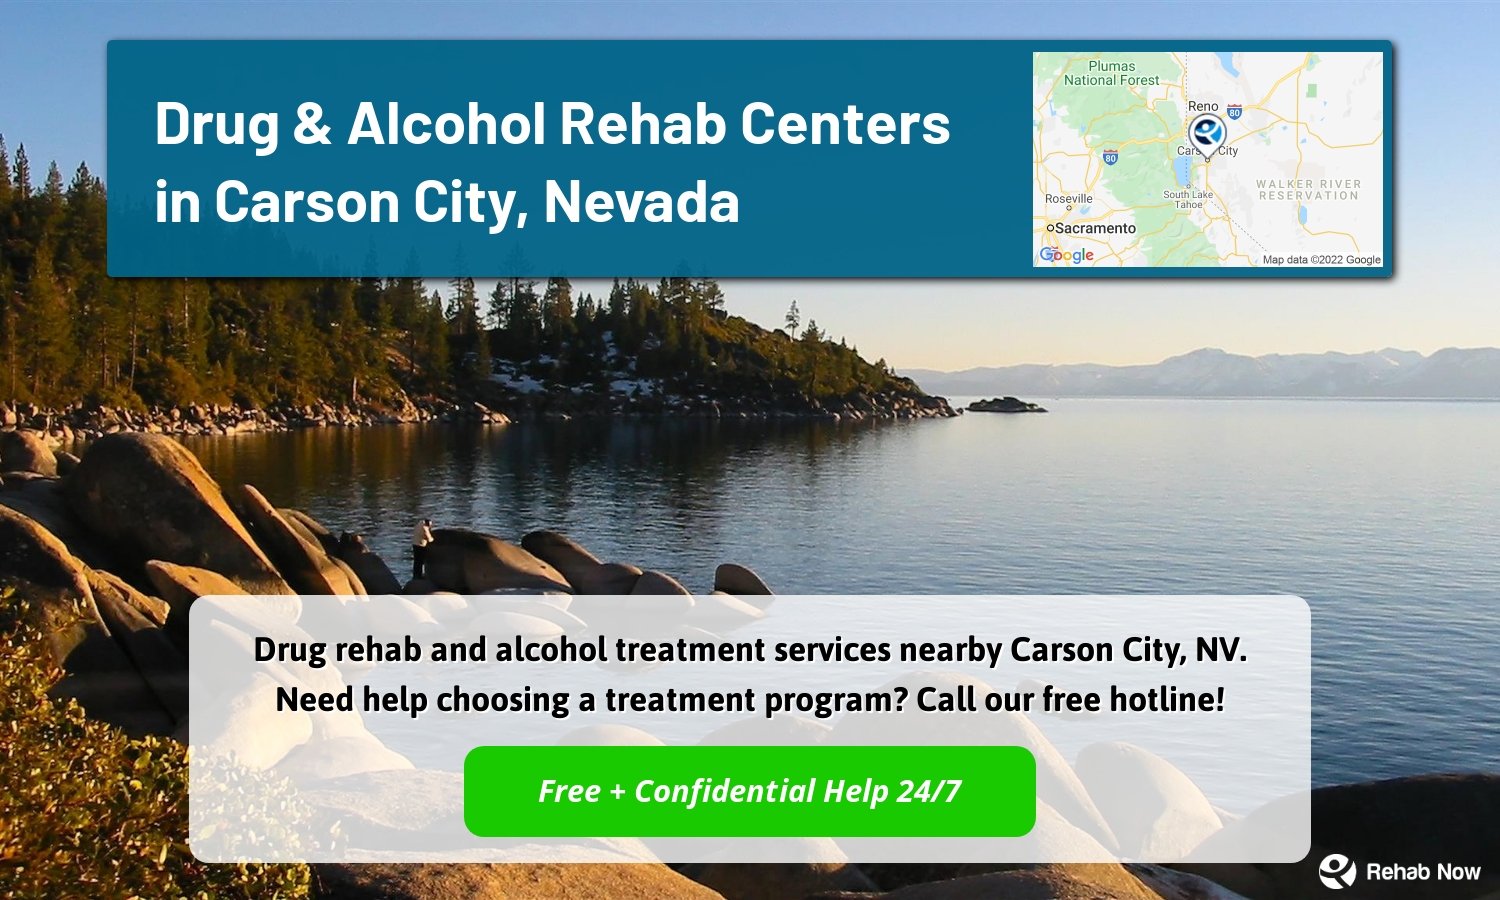 Drug rehab and alcohol treatment services nearby Carson City, NV. Need help choosing a treatment program? Call our free hotline!